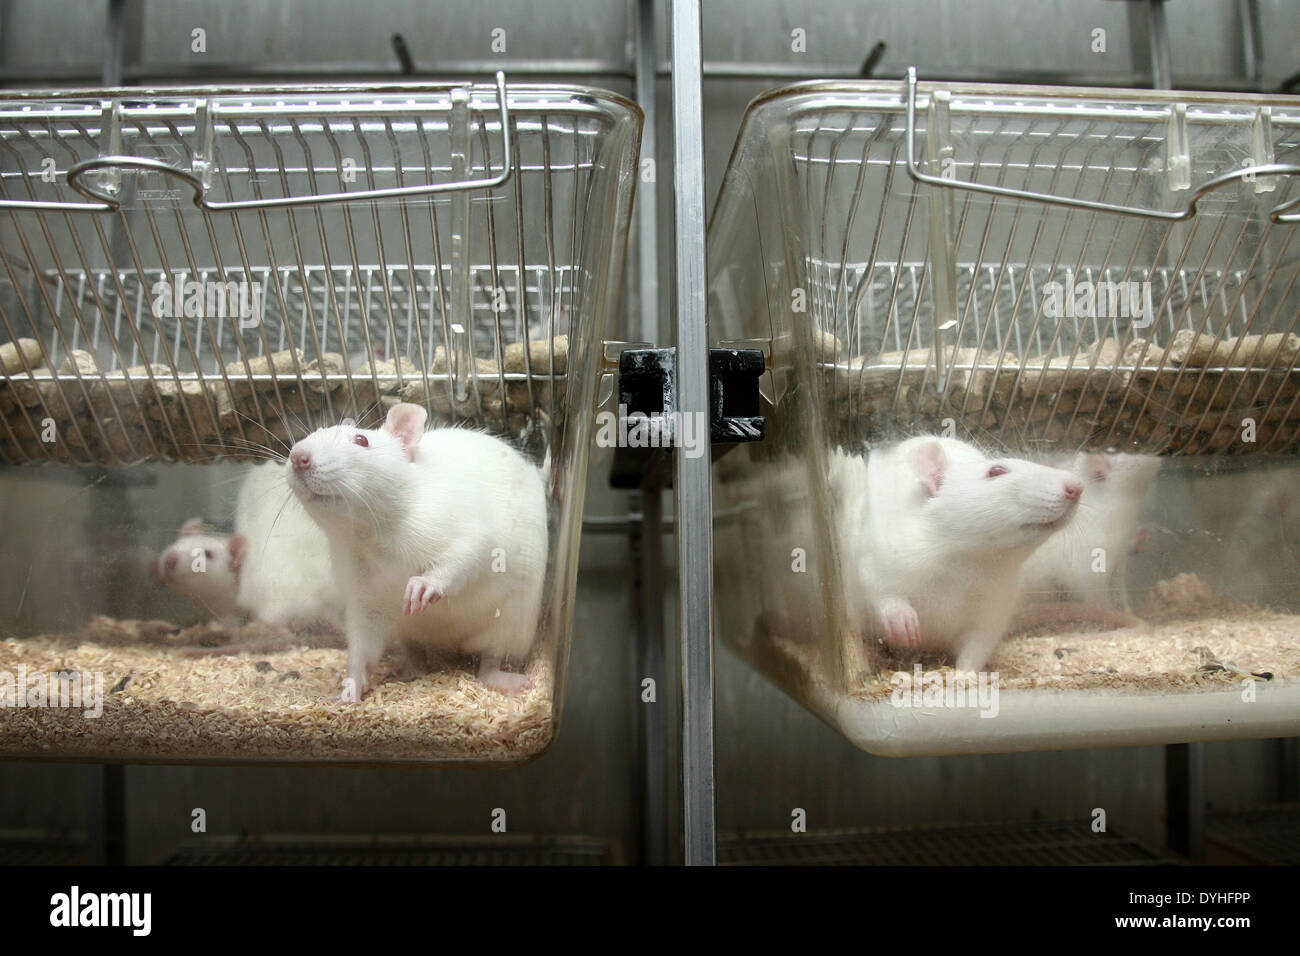 https://c8.alamy.com/comp/DYHFPP/white-laboratory-rats-in-a-cage-DYHFPP.jpg